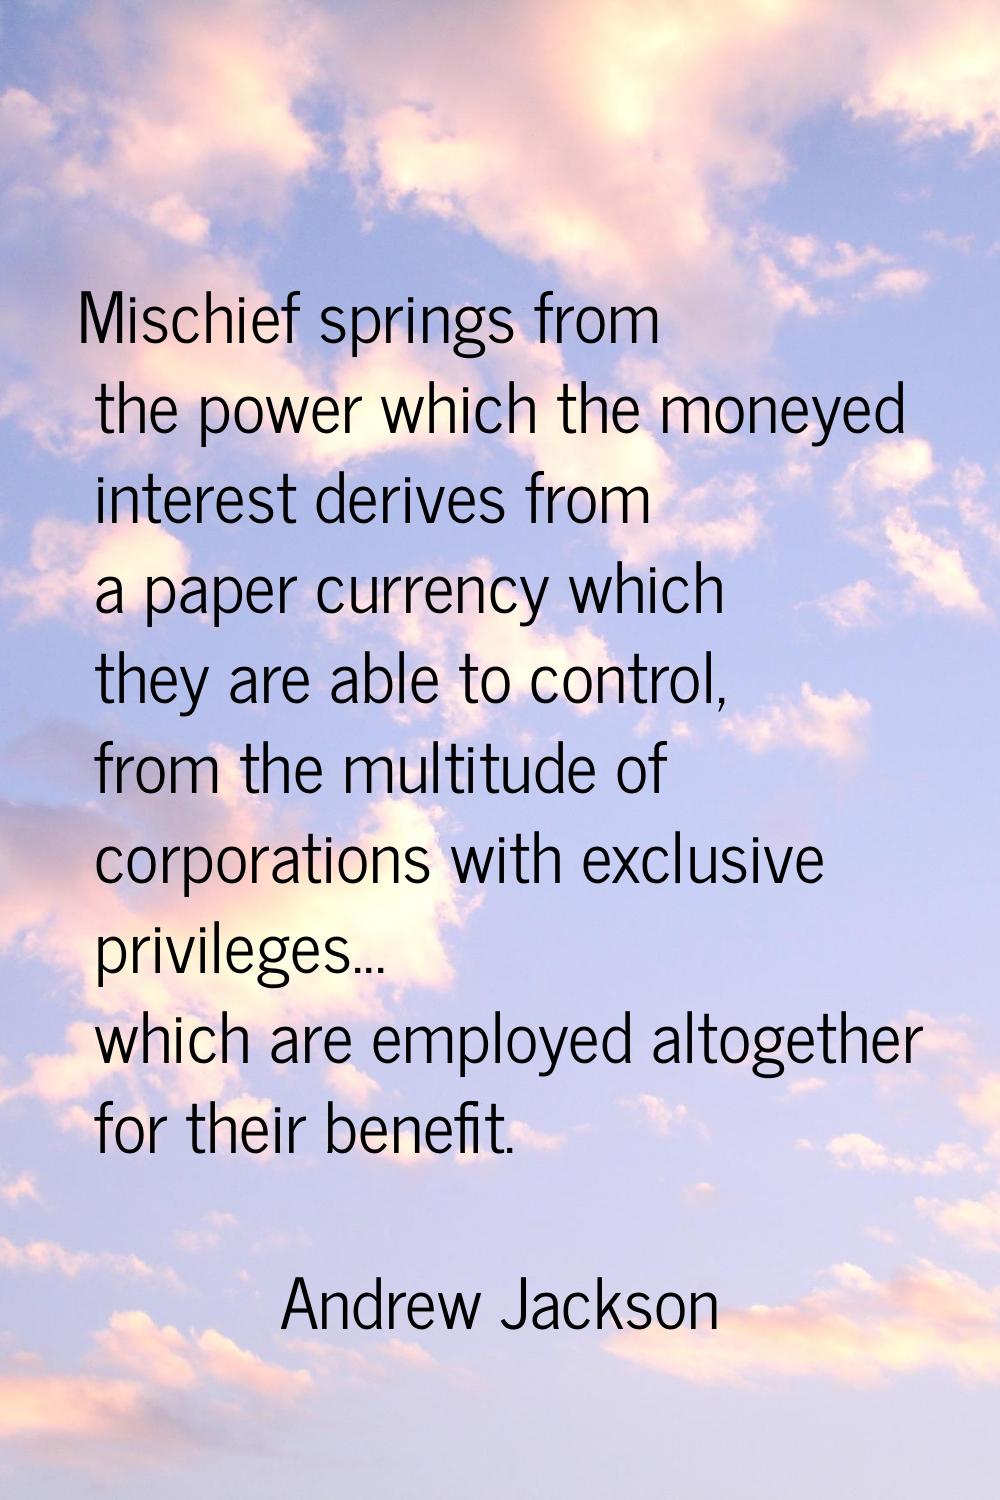 Mischief springs from the power which the moneyed interest derives from a paper currency which they